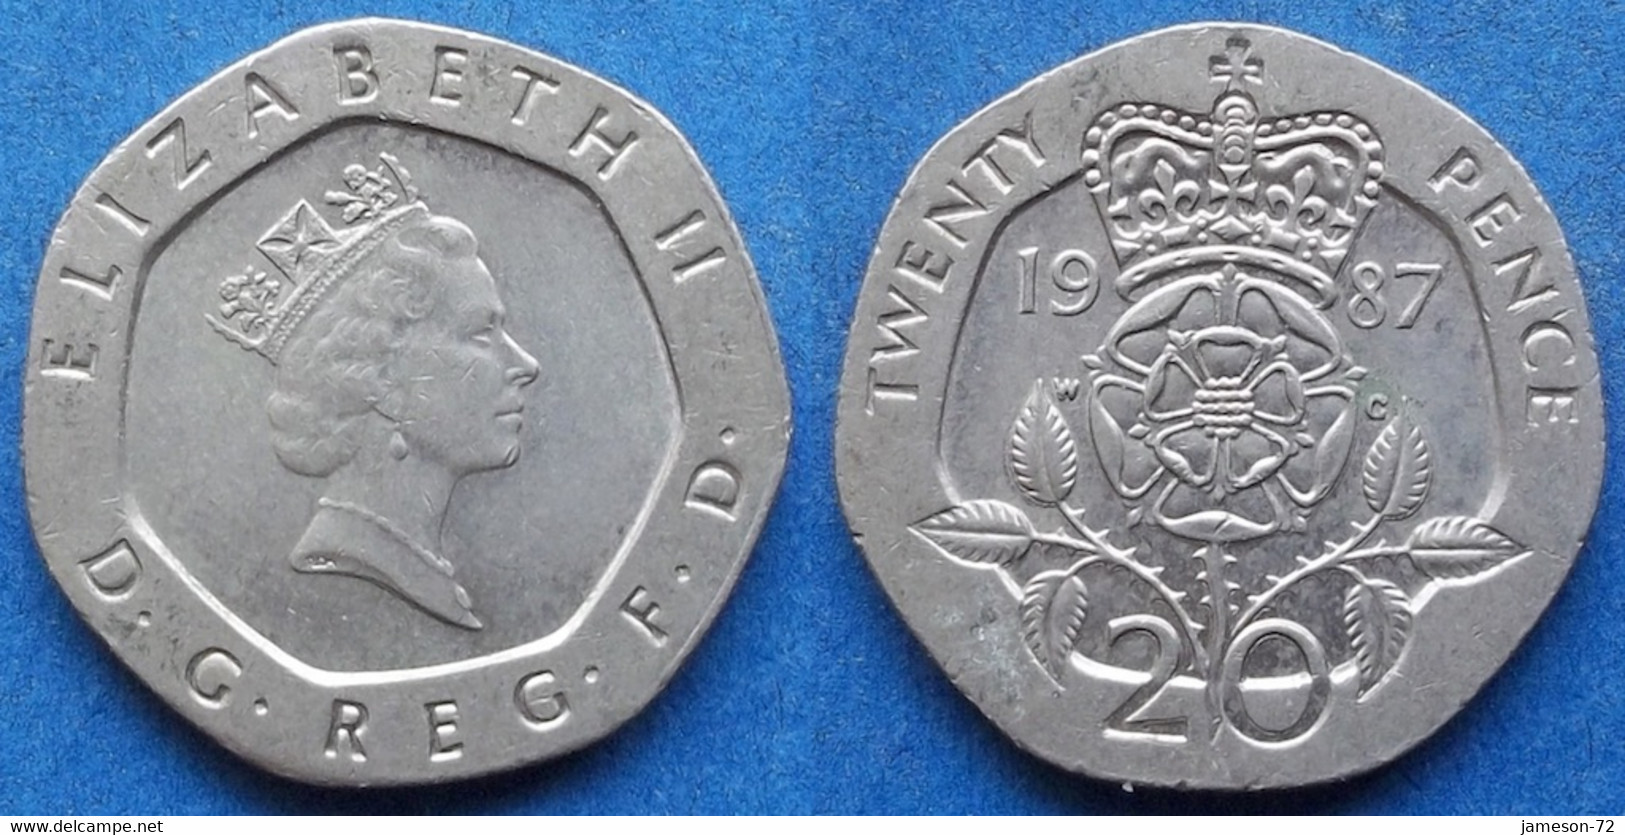 UK - 20 Pence 1987 KM# 939 Elizabeth II Decimal Coinage (1971) - Edelweiss Coins - 20 Pence